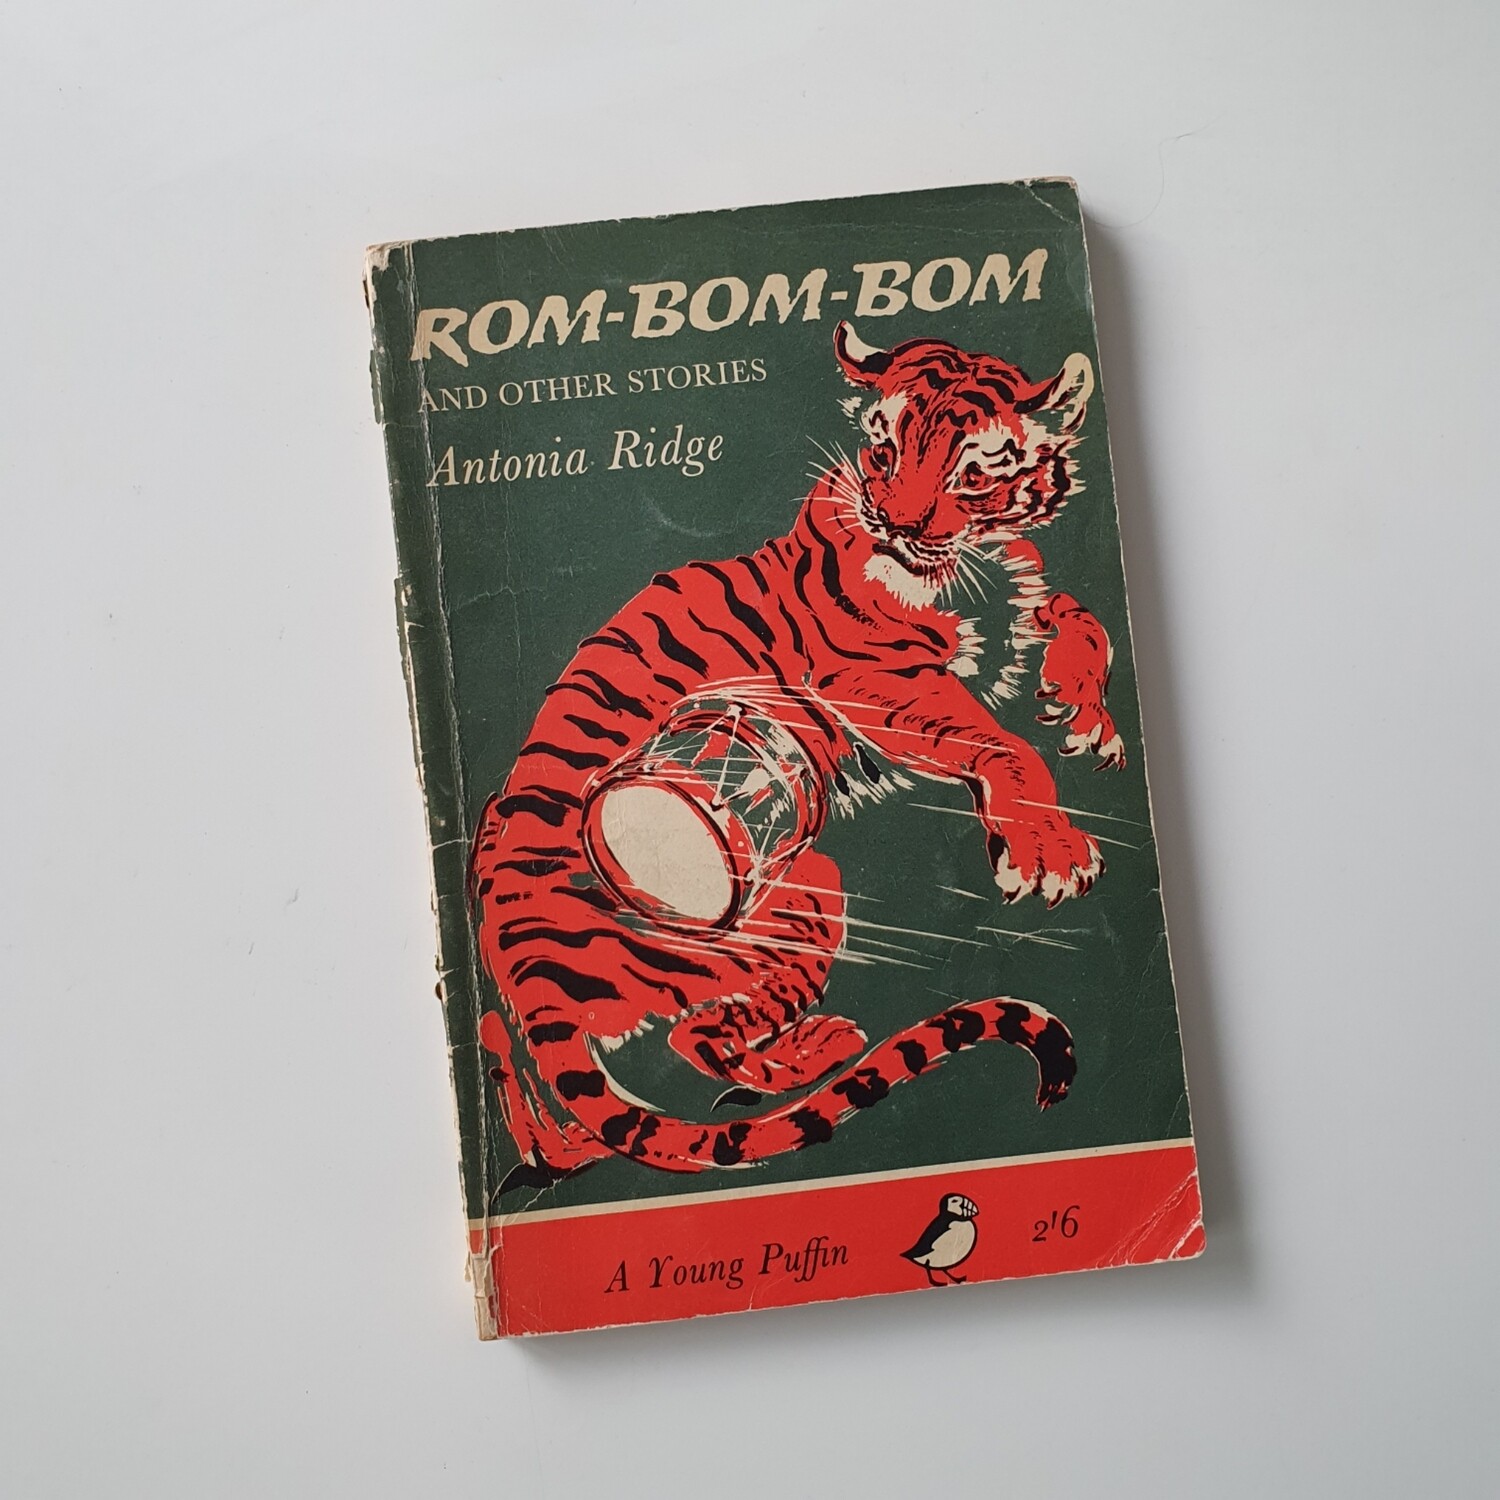 Rom-Bom-Bom by Antonia Ridge, 1965 - made from a paperback book, tiger